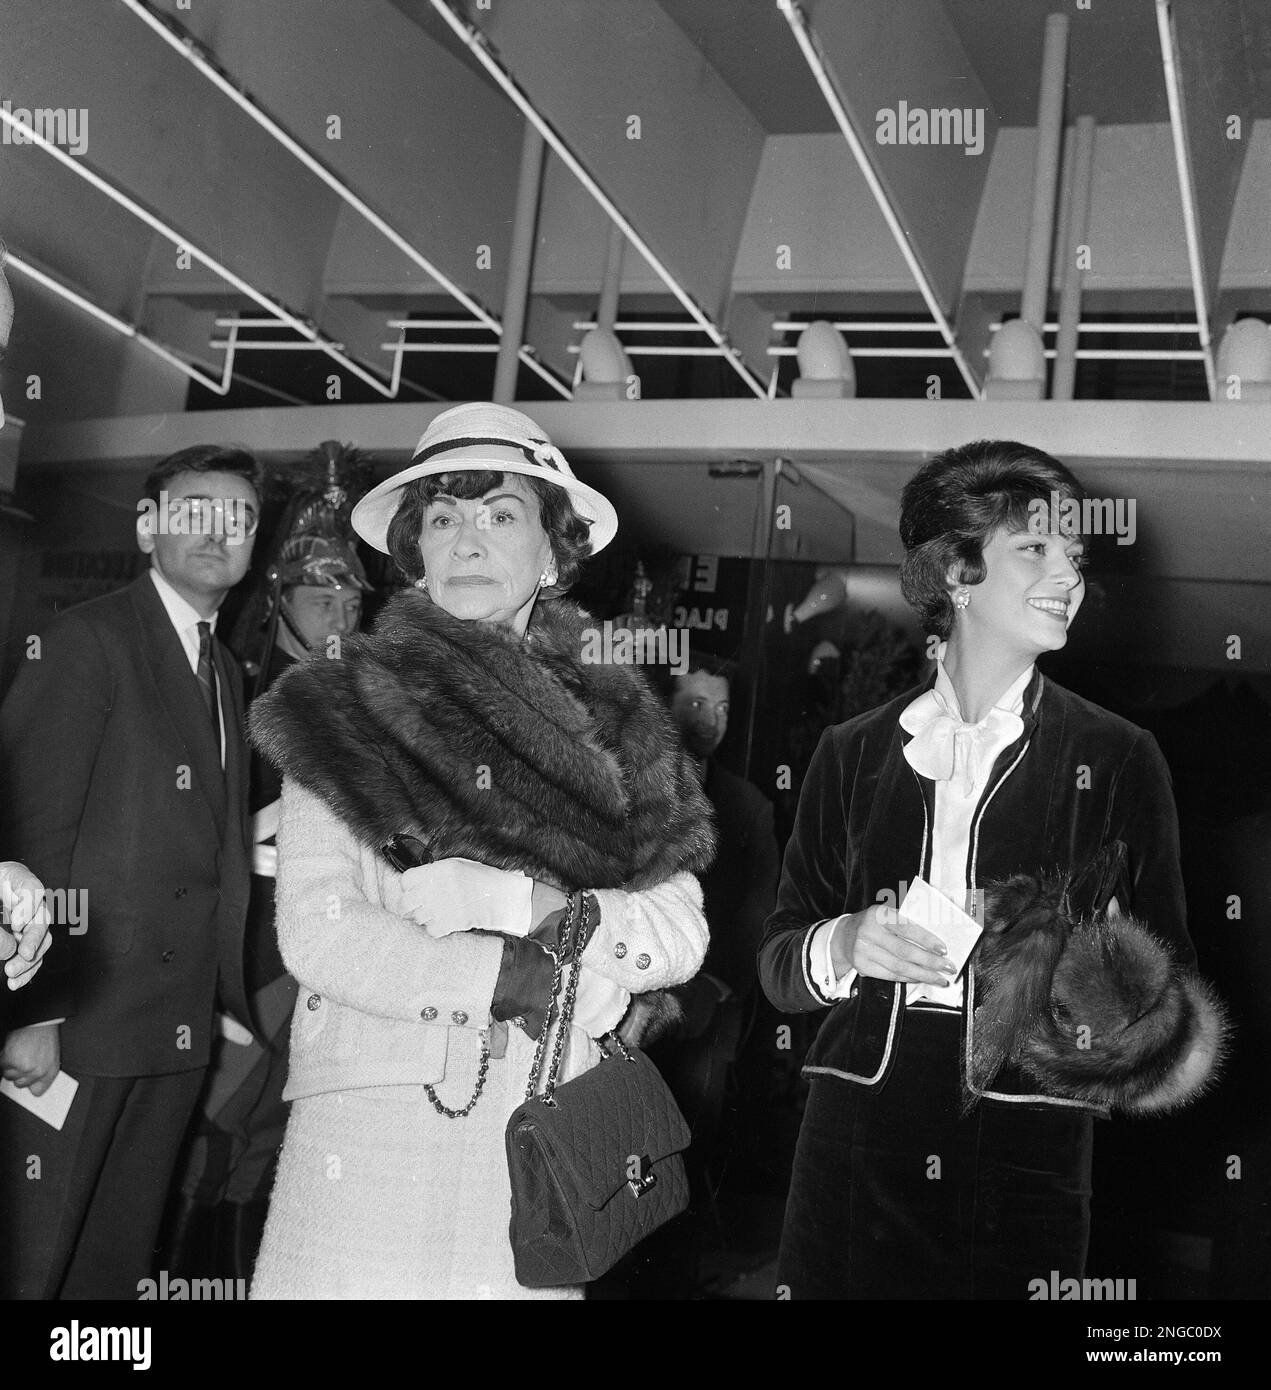 Fashion designer Gabrielle "Coco" Chanel, left, and Marie Helene Arnaud  attend the gala performance of "A Frenchman in Moscow" at the Kinopanorama  hall at La Motte Piquet in Paris, France, Oct. 13,